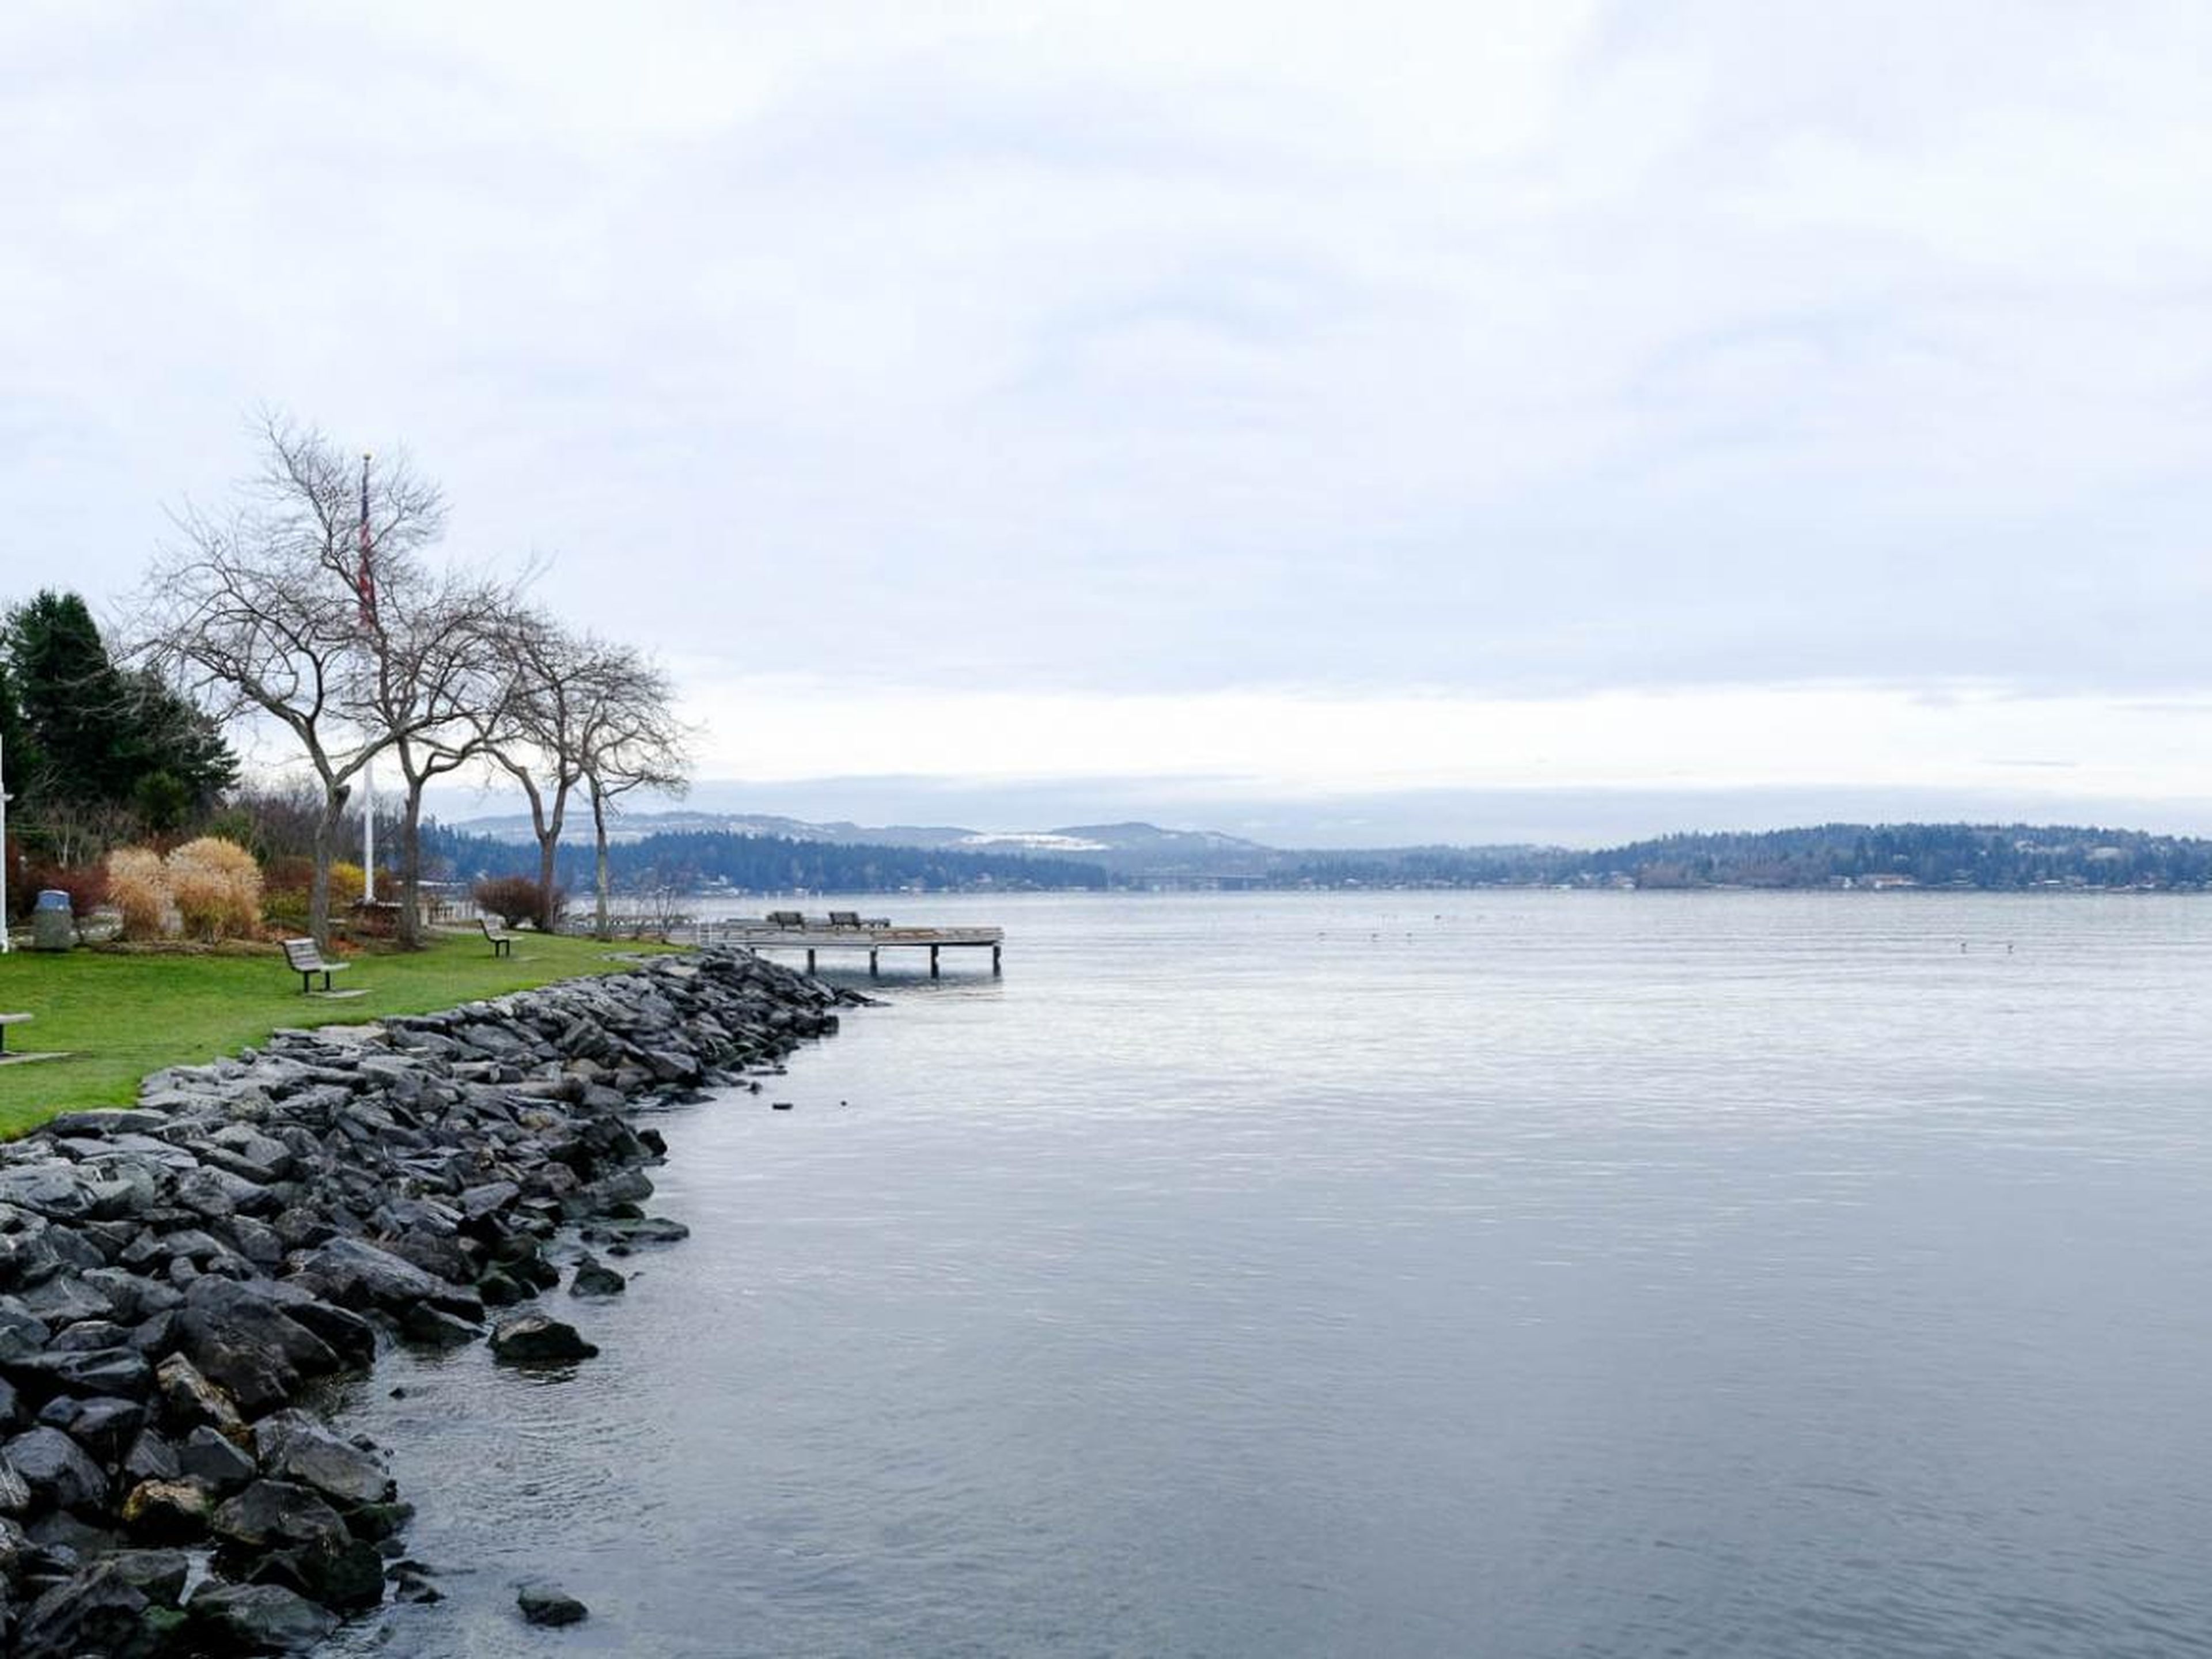 The city has a spectacular view of Seattle, Lake Washington, and the surrounding area. You feel miles away from Seattle's bustling downtown from here.